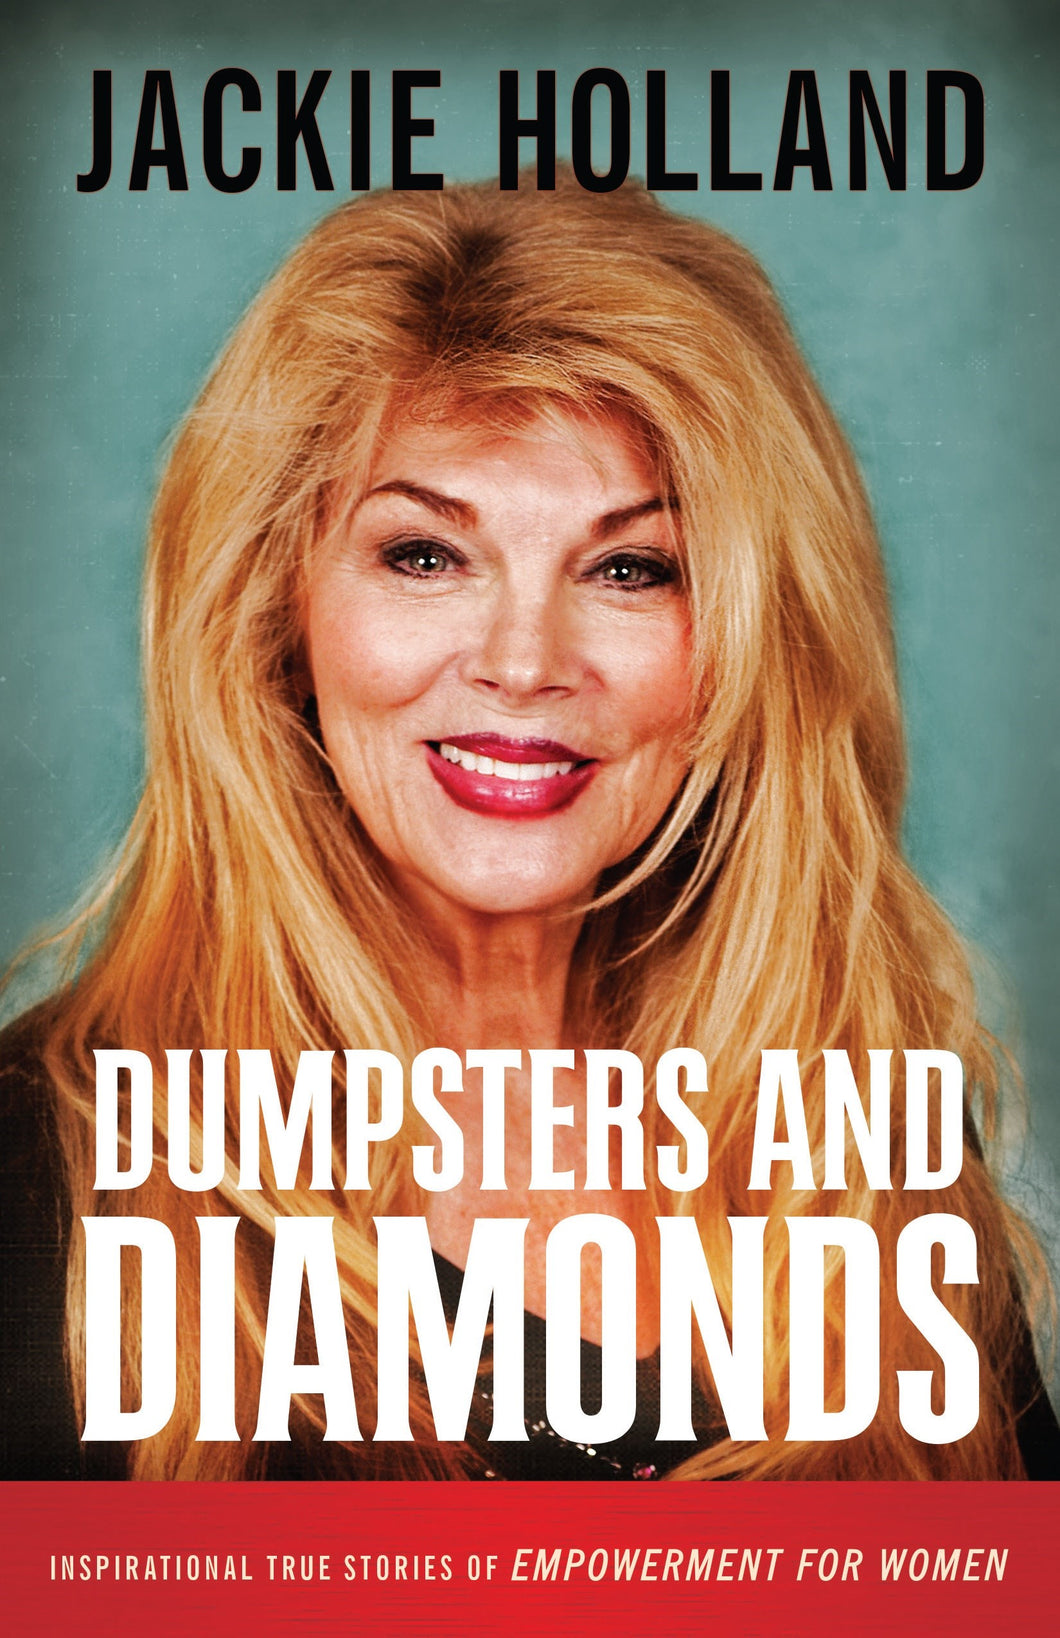 DUMPSTERS AND DIAMONDS